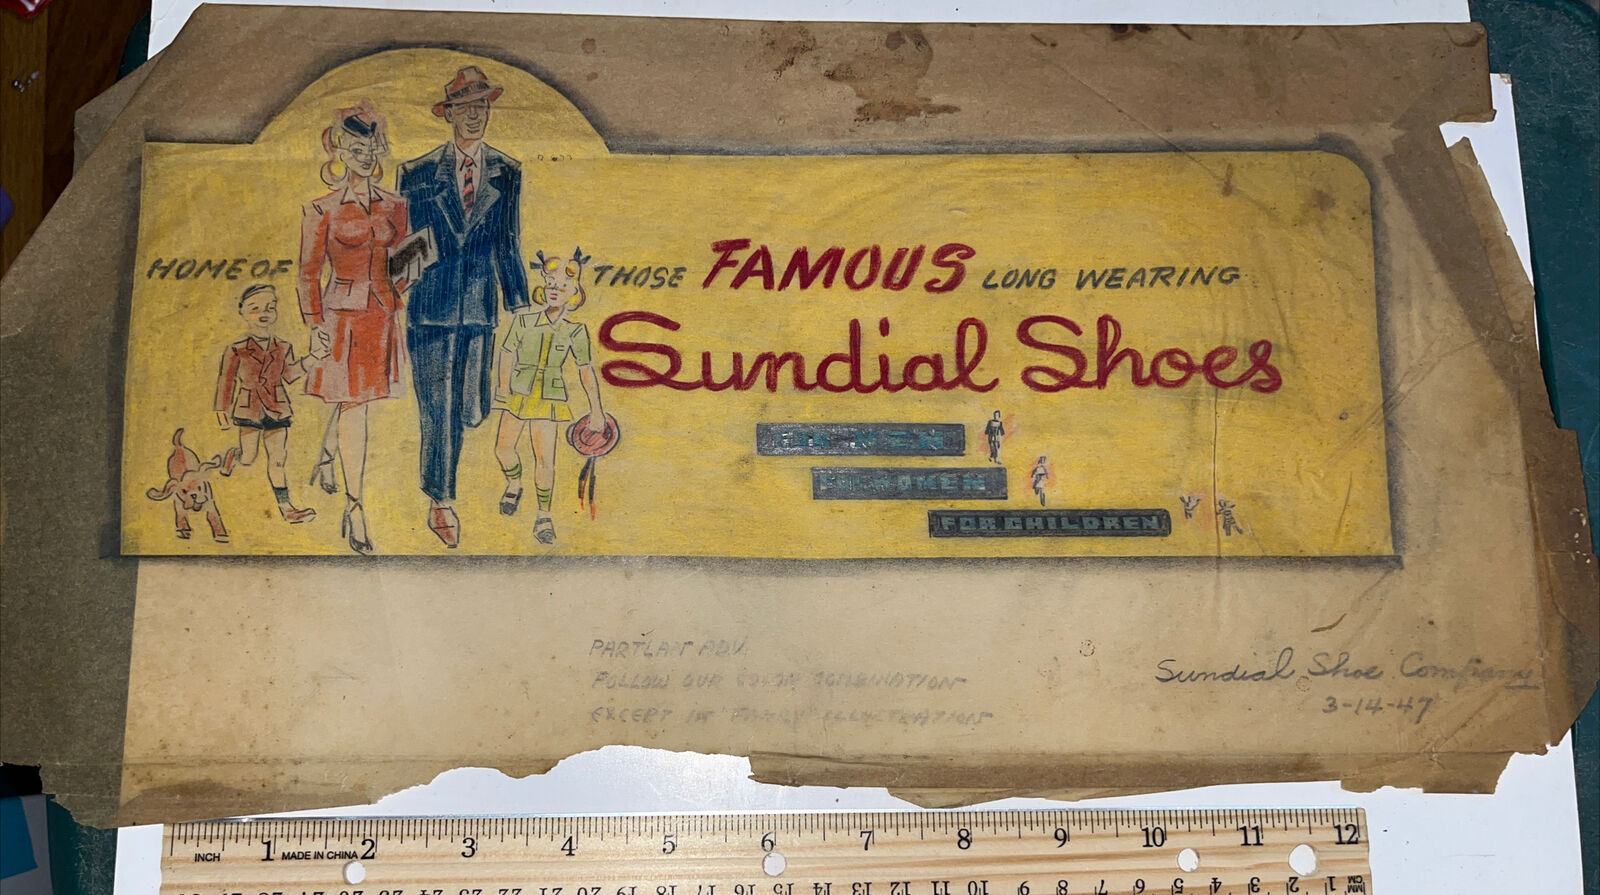 Vintage 1947 Outdoor Advertising Sample for Sundial Shoes - Ad Mockup